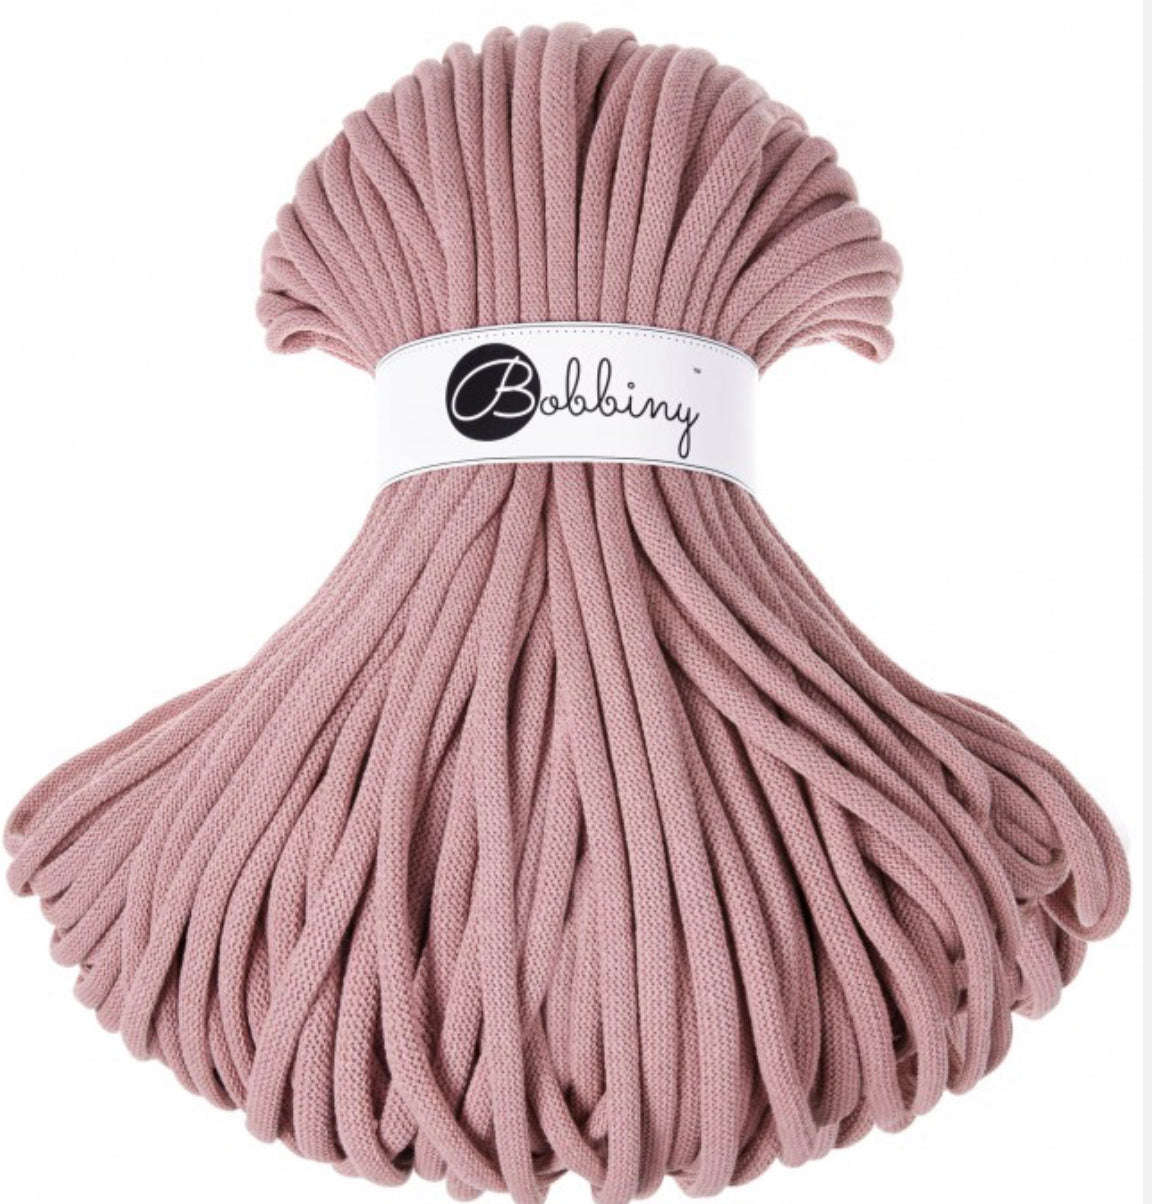 Where can I find Bobbiny Braided Cords Bobbiny Jumbo 9mm - 100m Blush? These gorgeous Bobbiny Ropes are made in Poland from 100% recycled cottons and are non toxic and certified safe for children.  9mm Diameter Length 100m Recommended for use with 14-16mm crochet hooks or knitting needles. Perfect for use with Macrame, Crochet or Knitting.